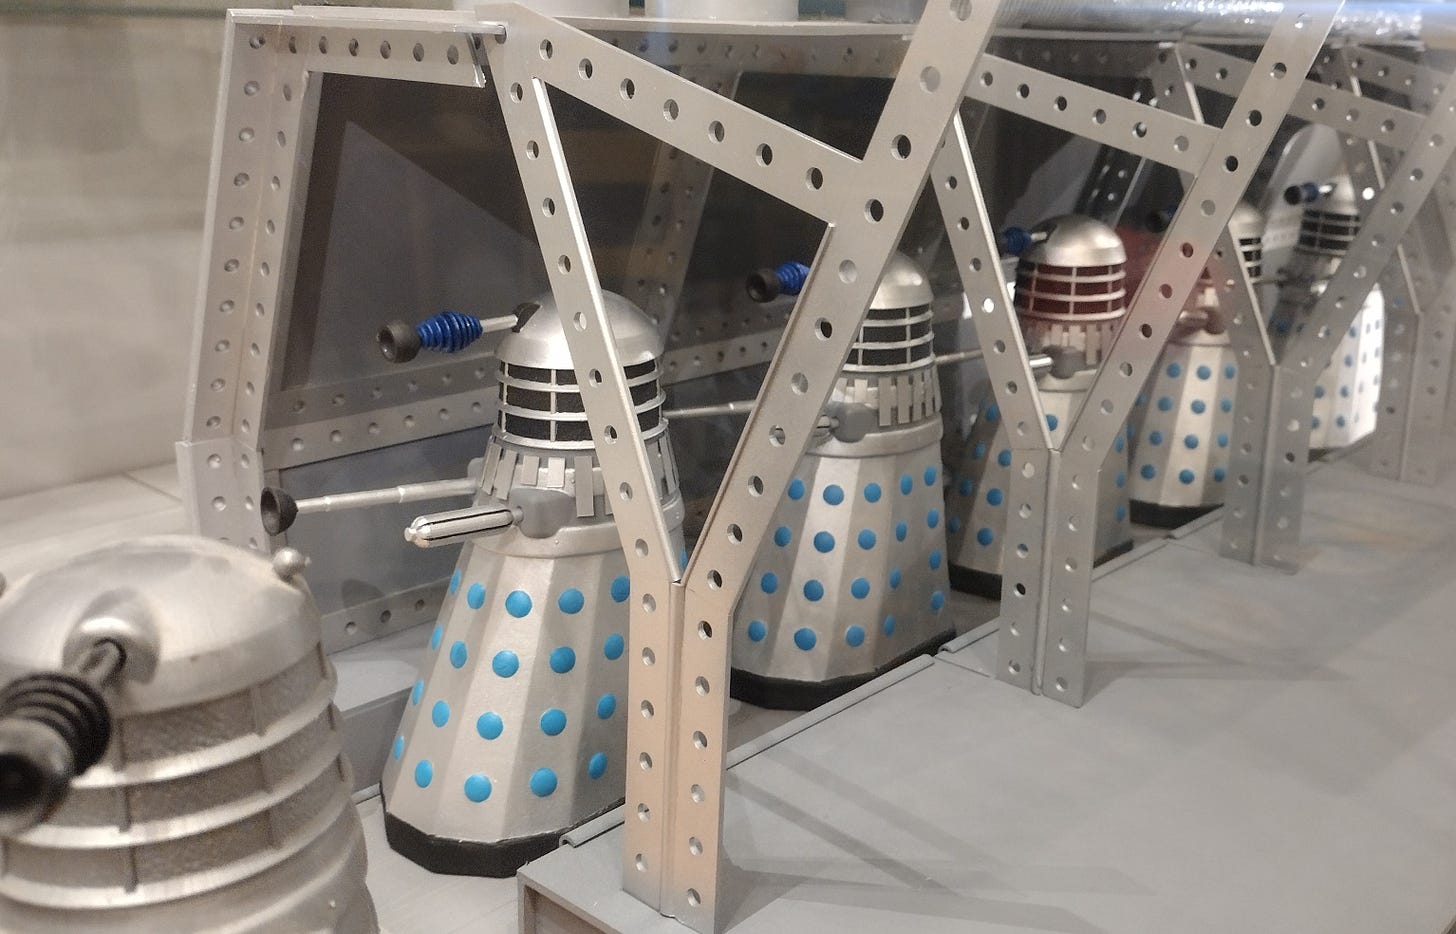 A model Dalek production line based on one from The Power of the Daleks